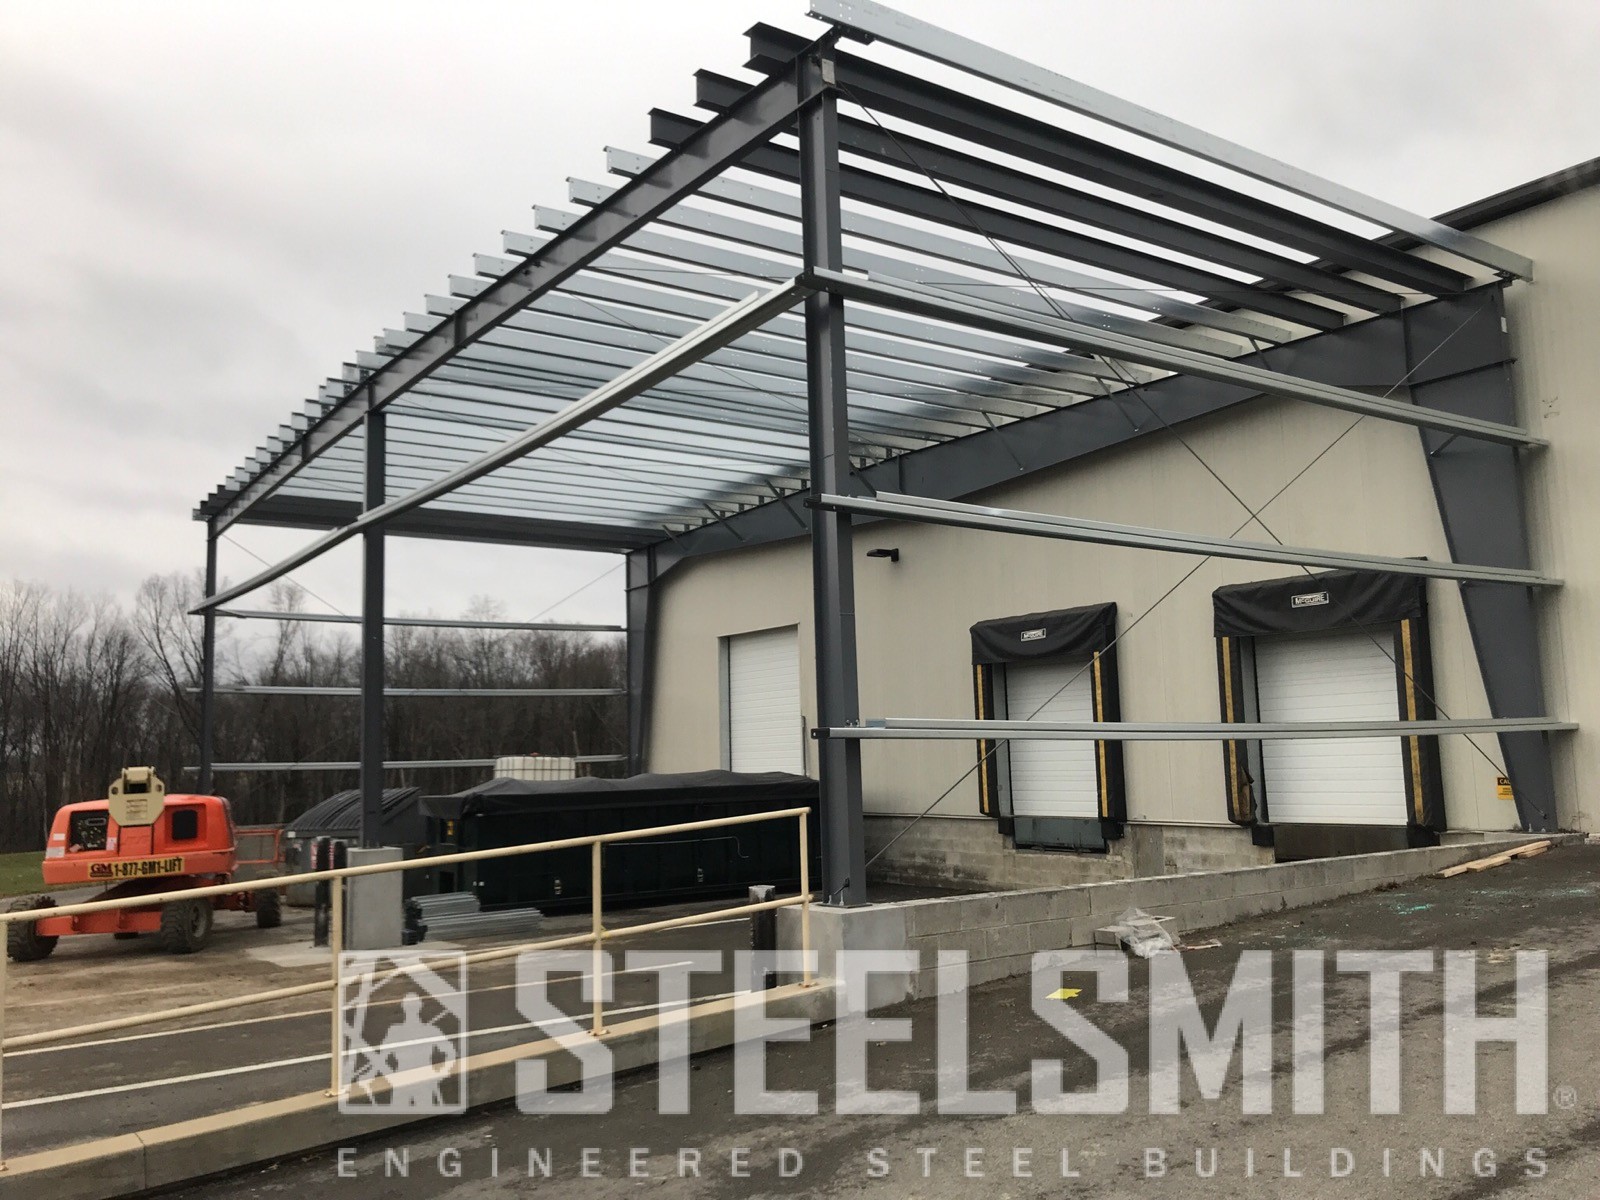 Warehouse  Steelsmith Inc Steel Buildings and Design Build Services